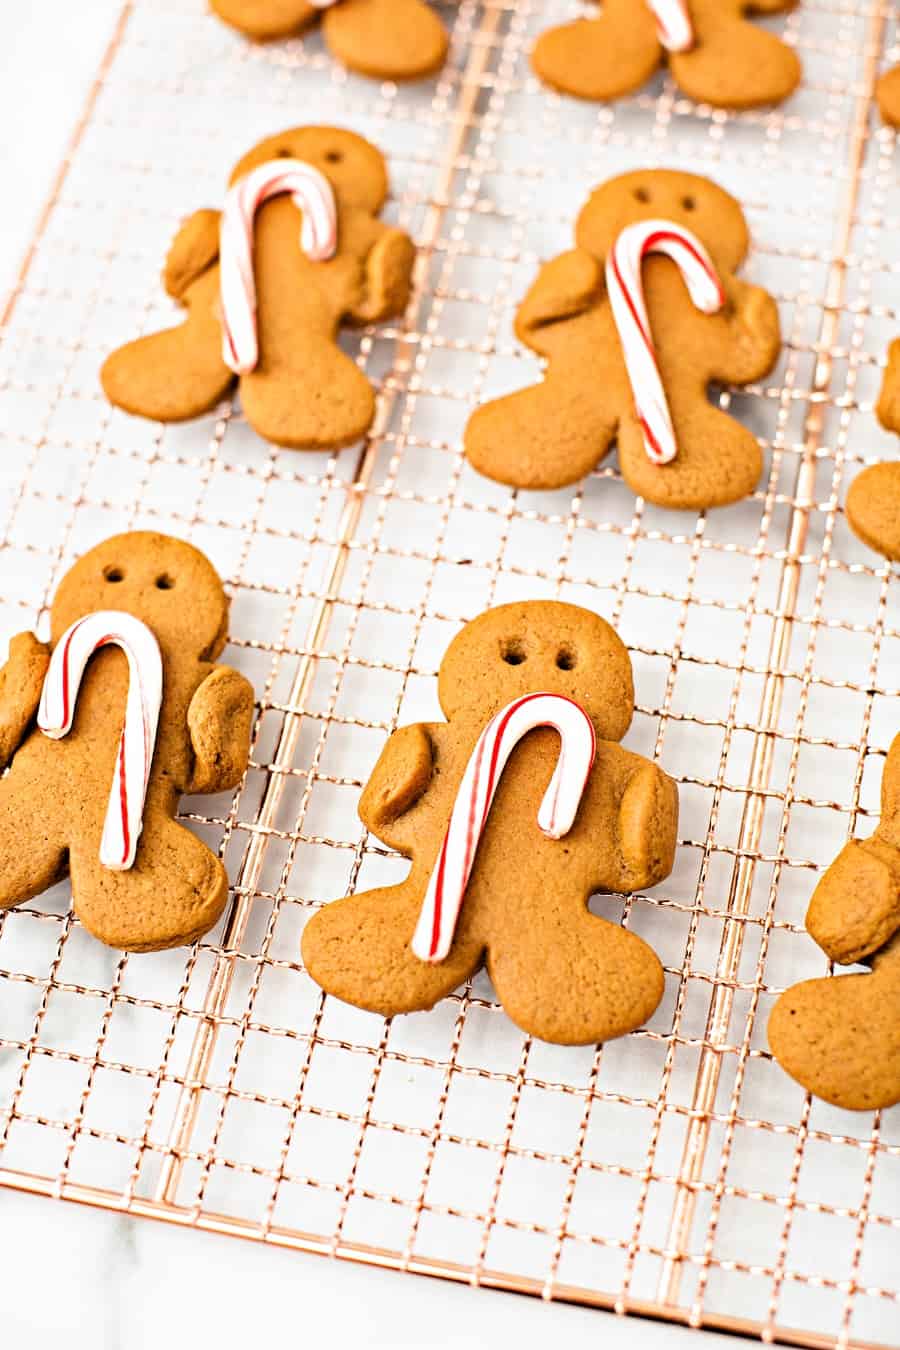 Gingerbread men cookies holding candy canes